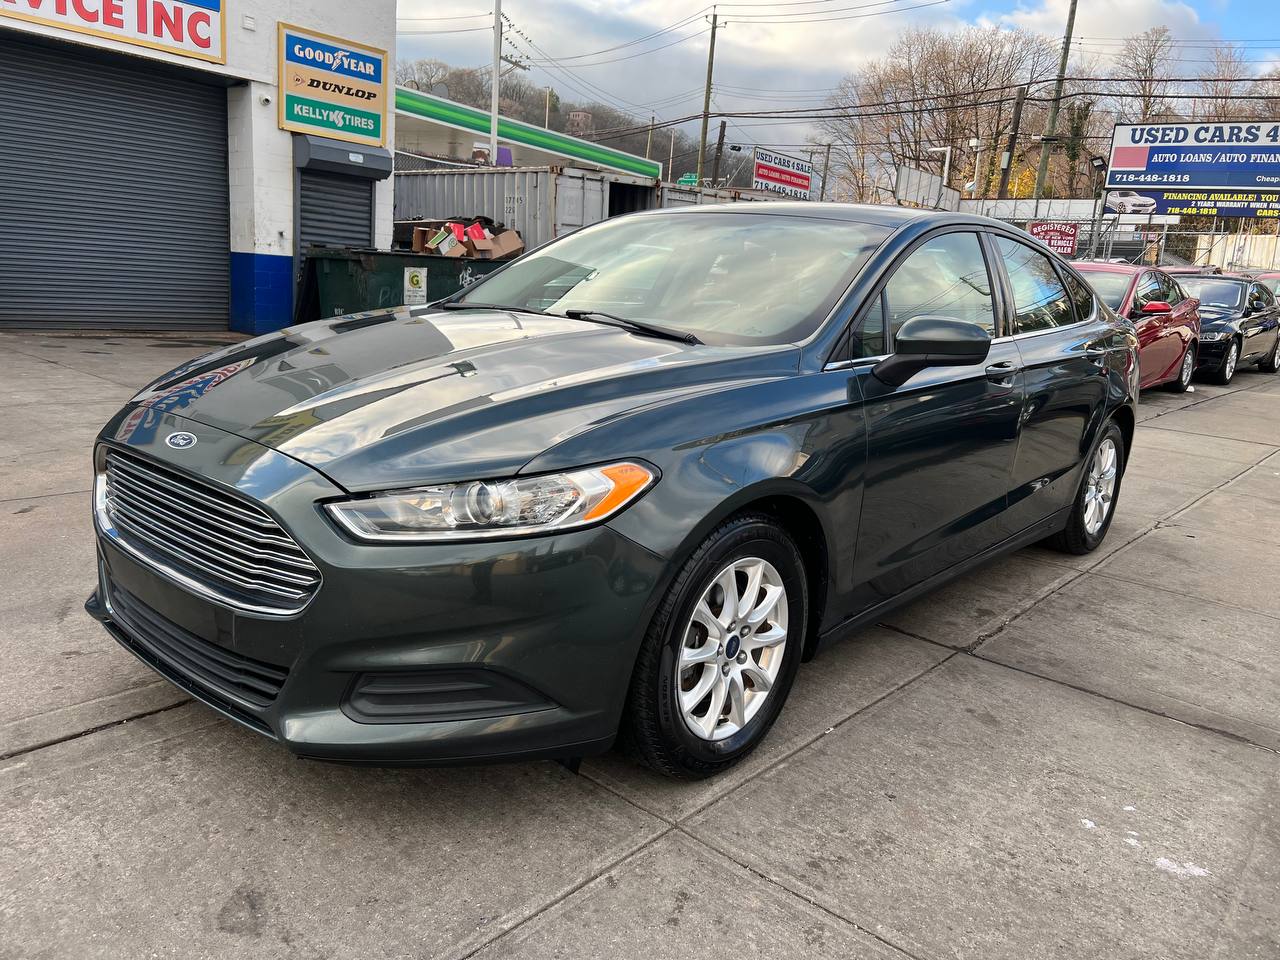 Used Car - 2016 Ford Fusion for Sale in Staten Island, NY